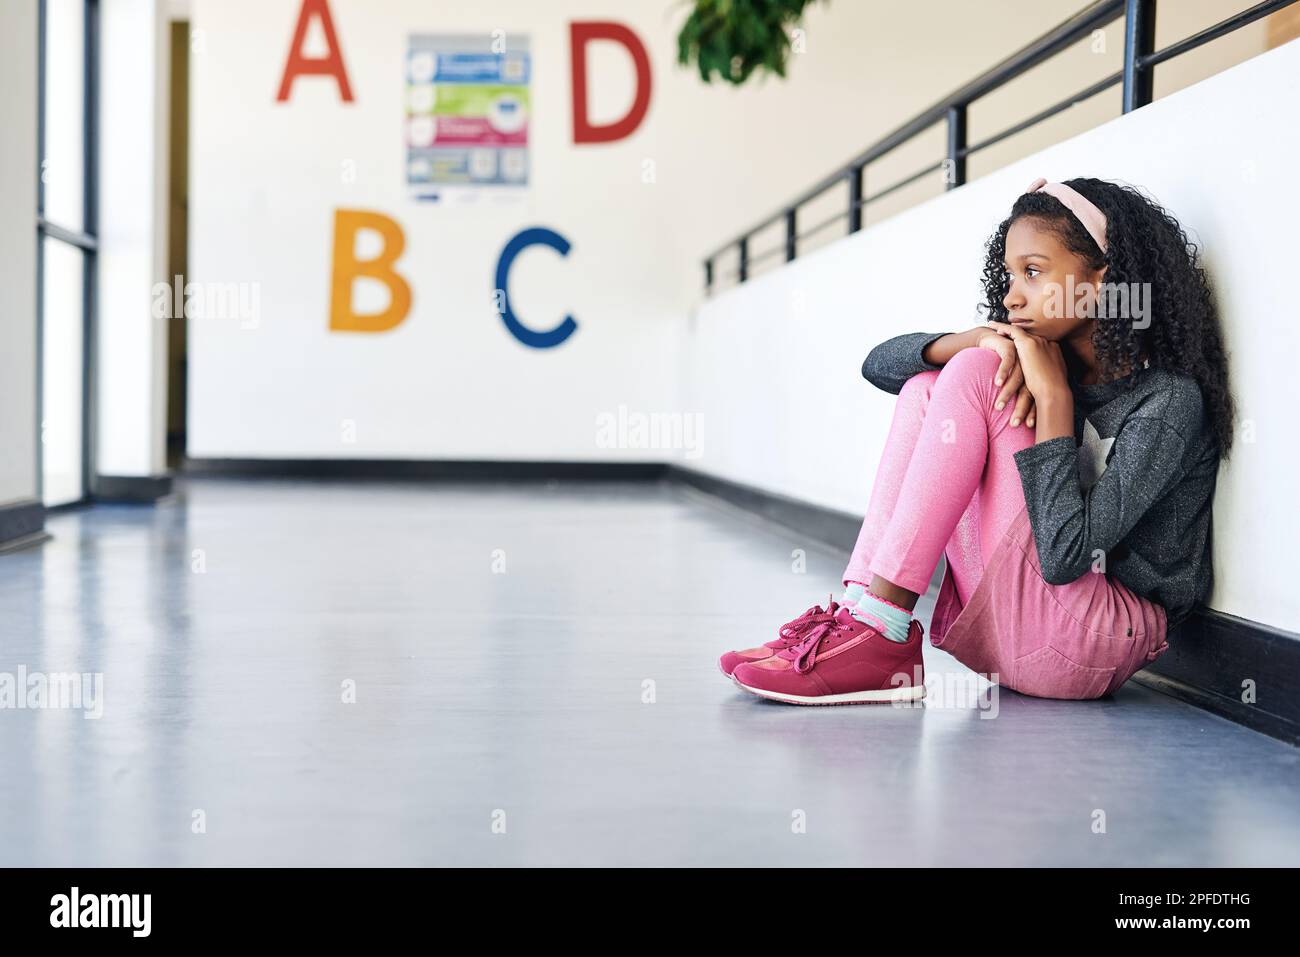 Where are my parents. Full length shot of a young girl sitting alone in the hallway at school and feeling depressed. Stock Photo